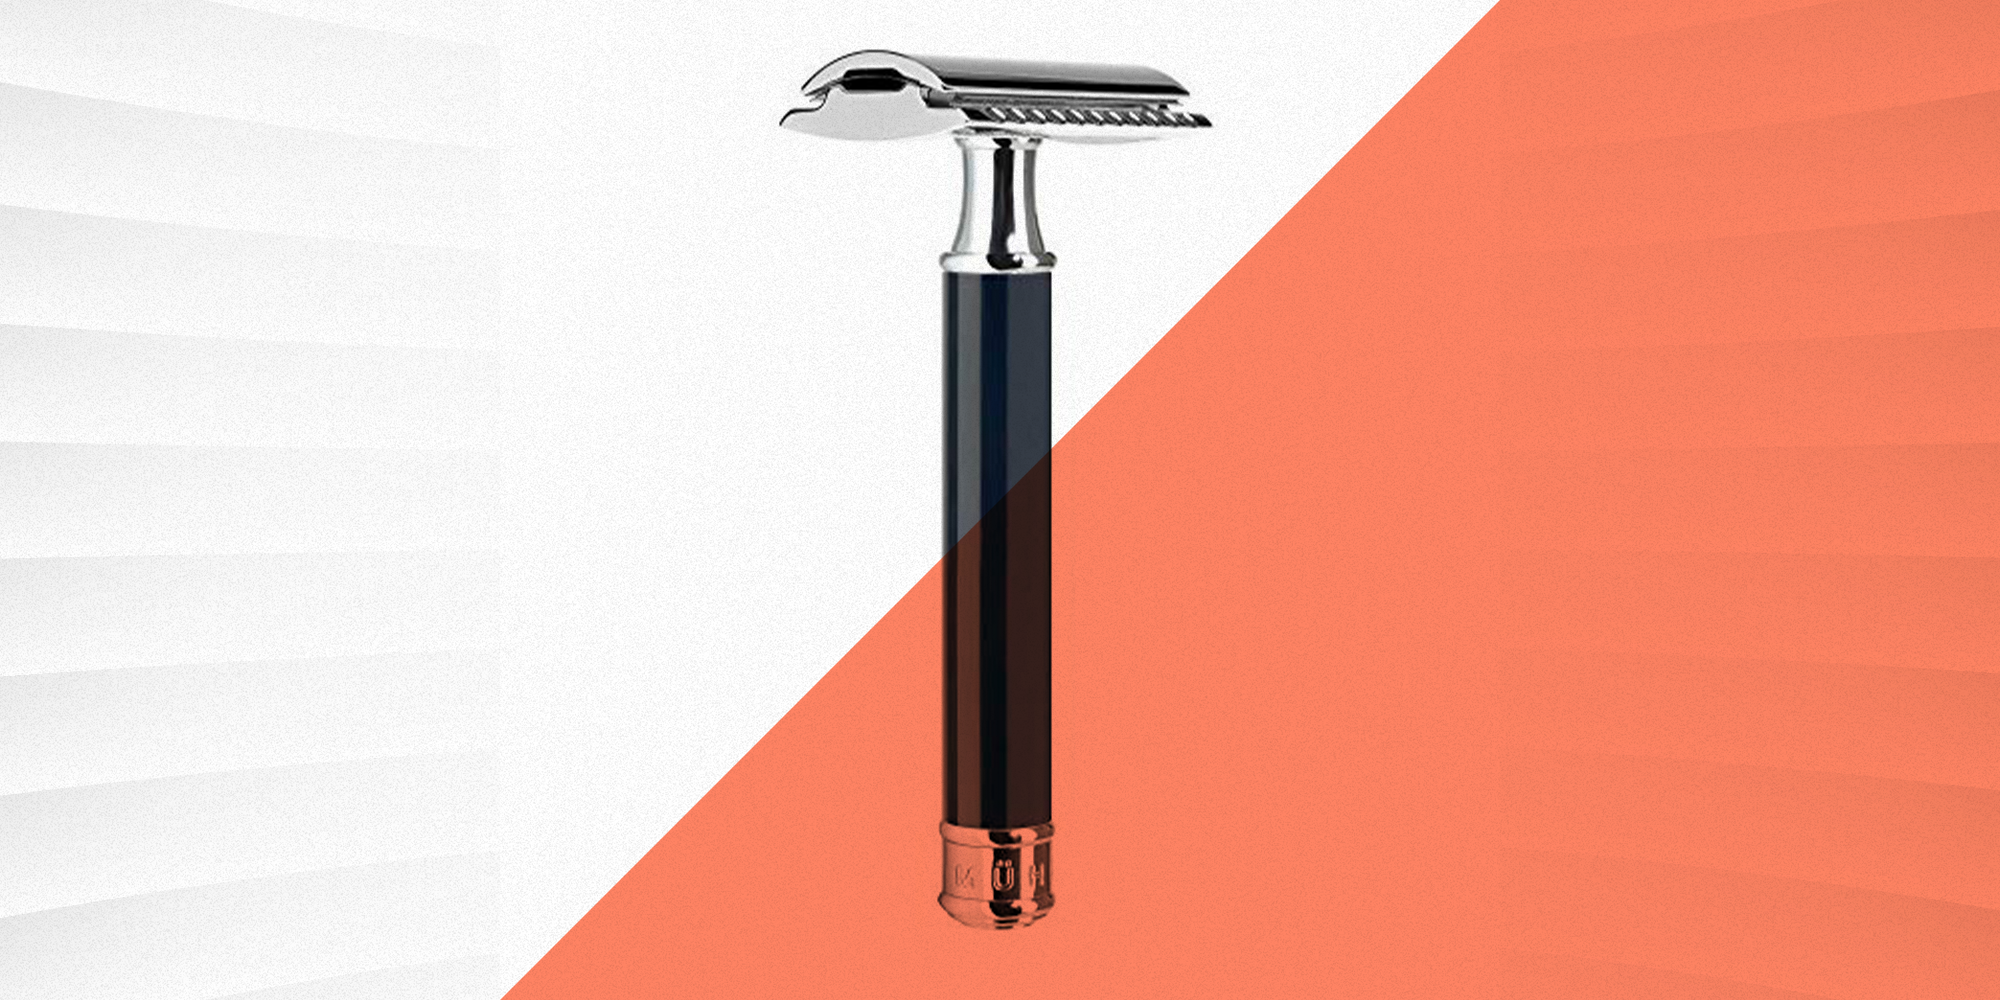 Western Razor Reviews A Closer Look at This American-Made Safety Razor Brand